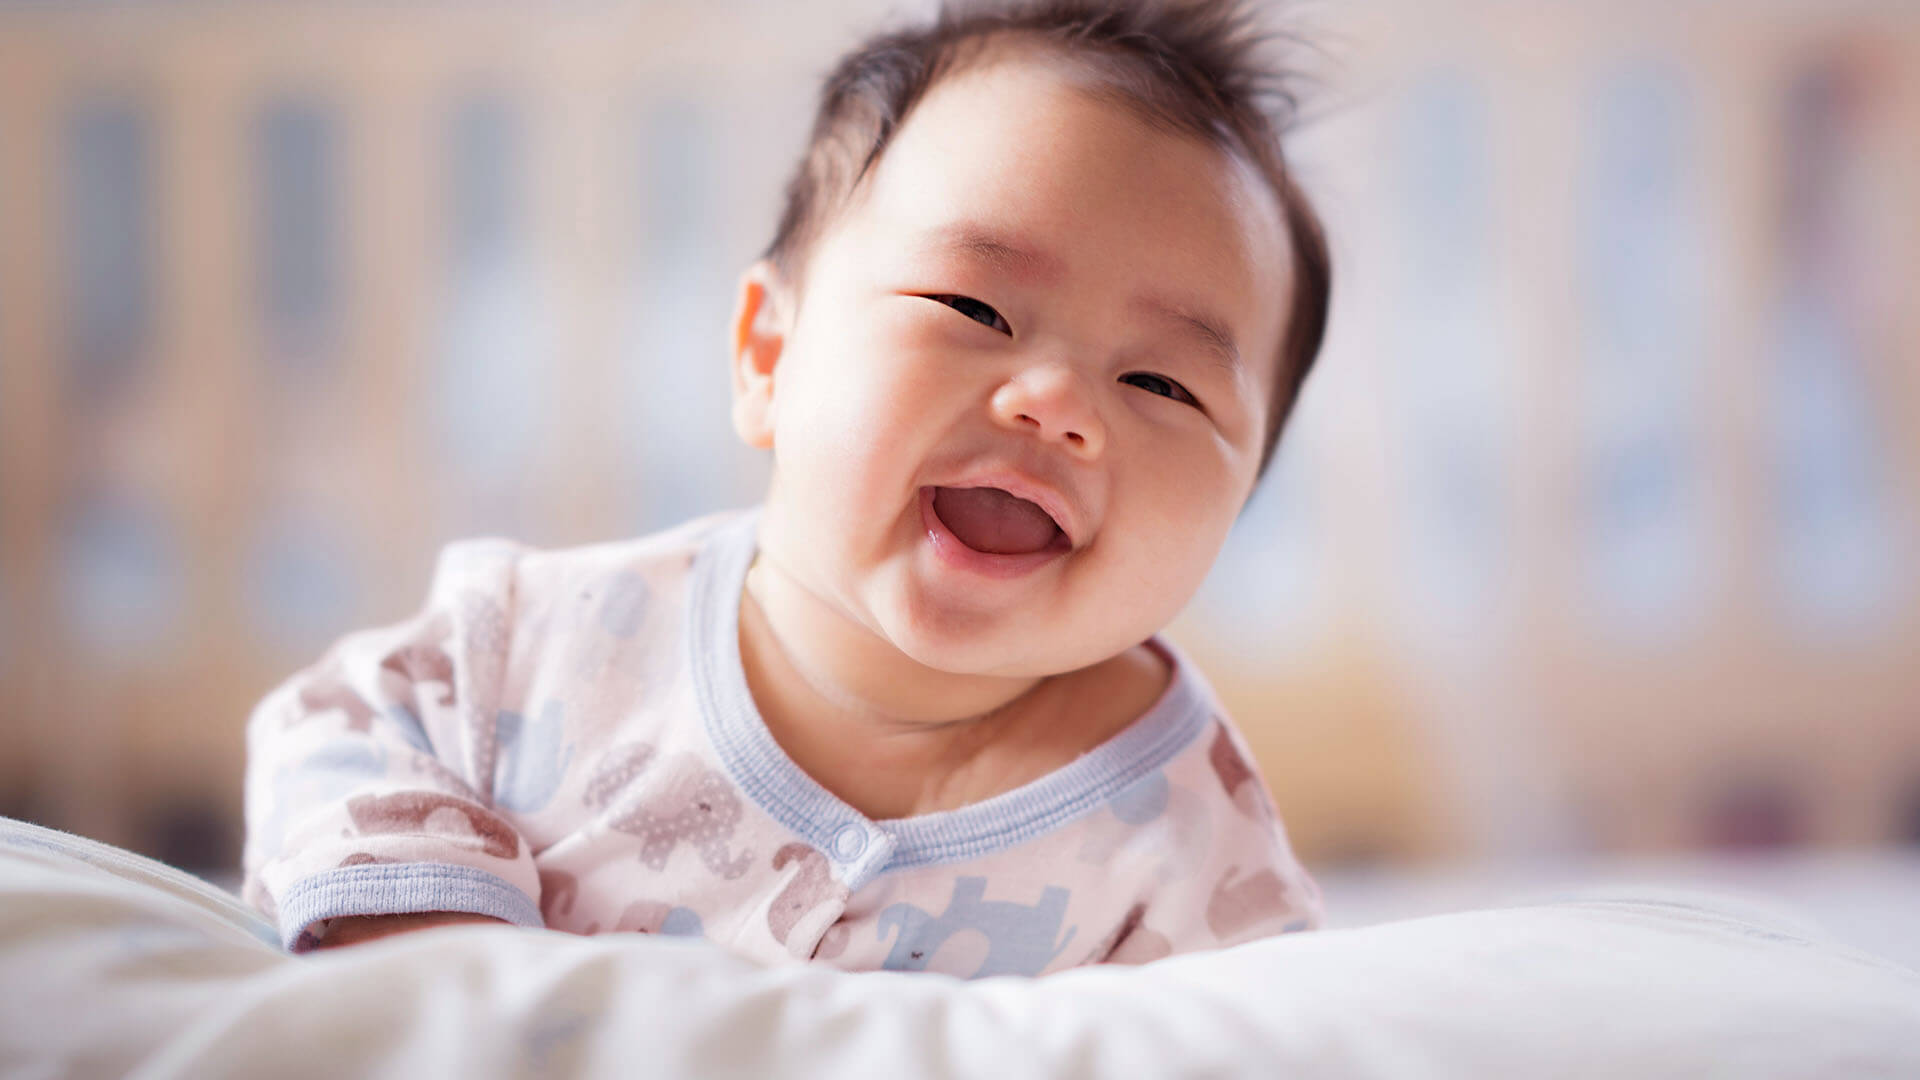 How do newborn babies primarily learn?